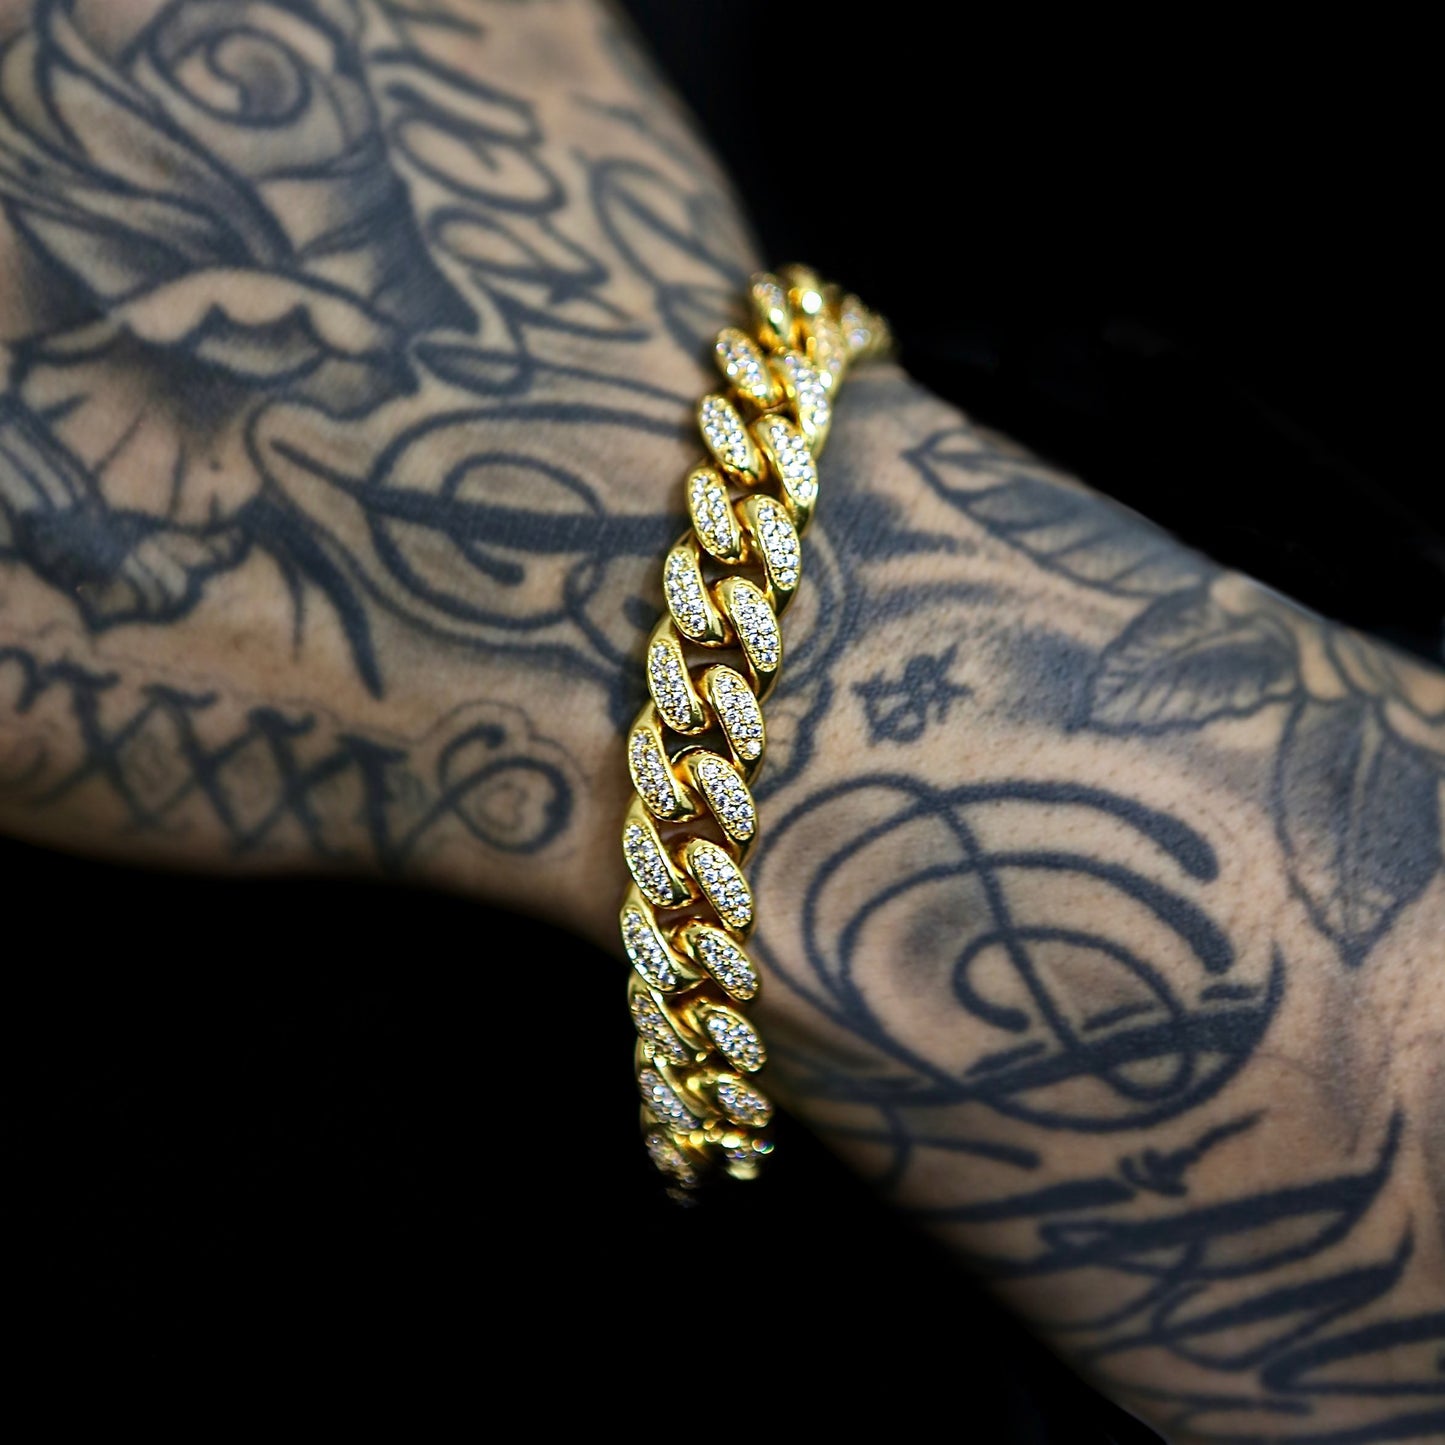 12mm Gold Plated Iced Out Miami Cuban Bracelet